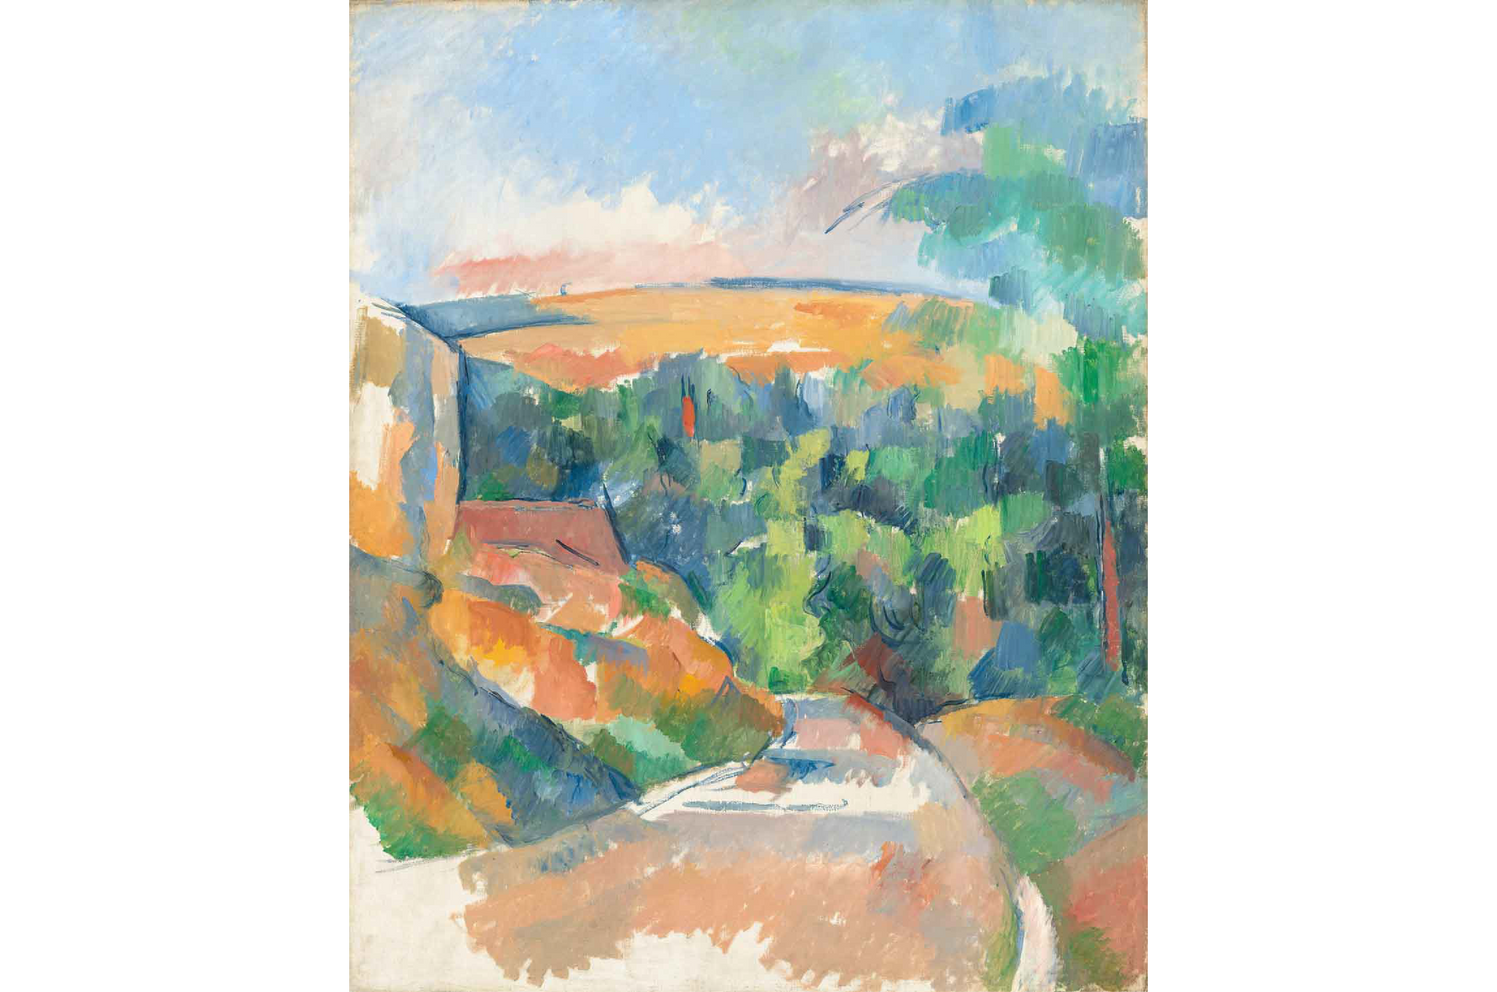 The Bend in the Road by Paul Cezanne